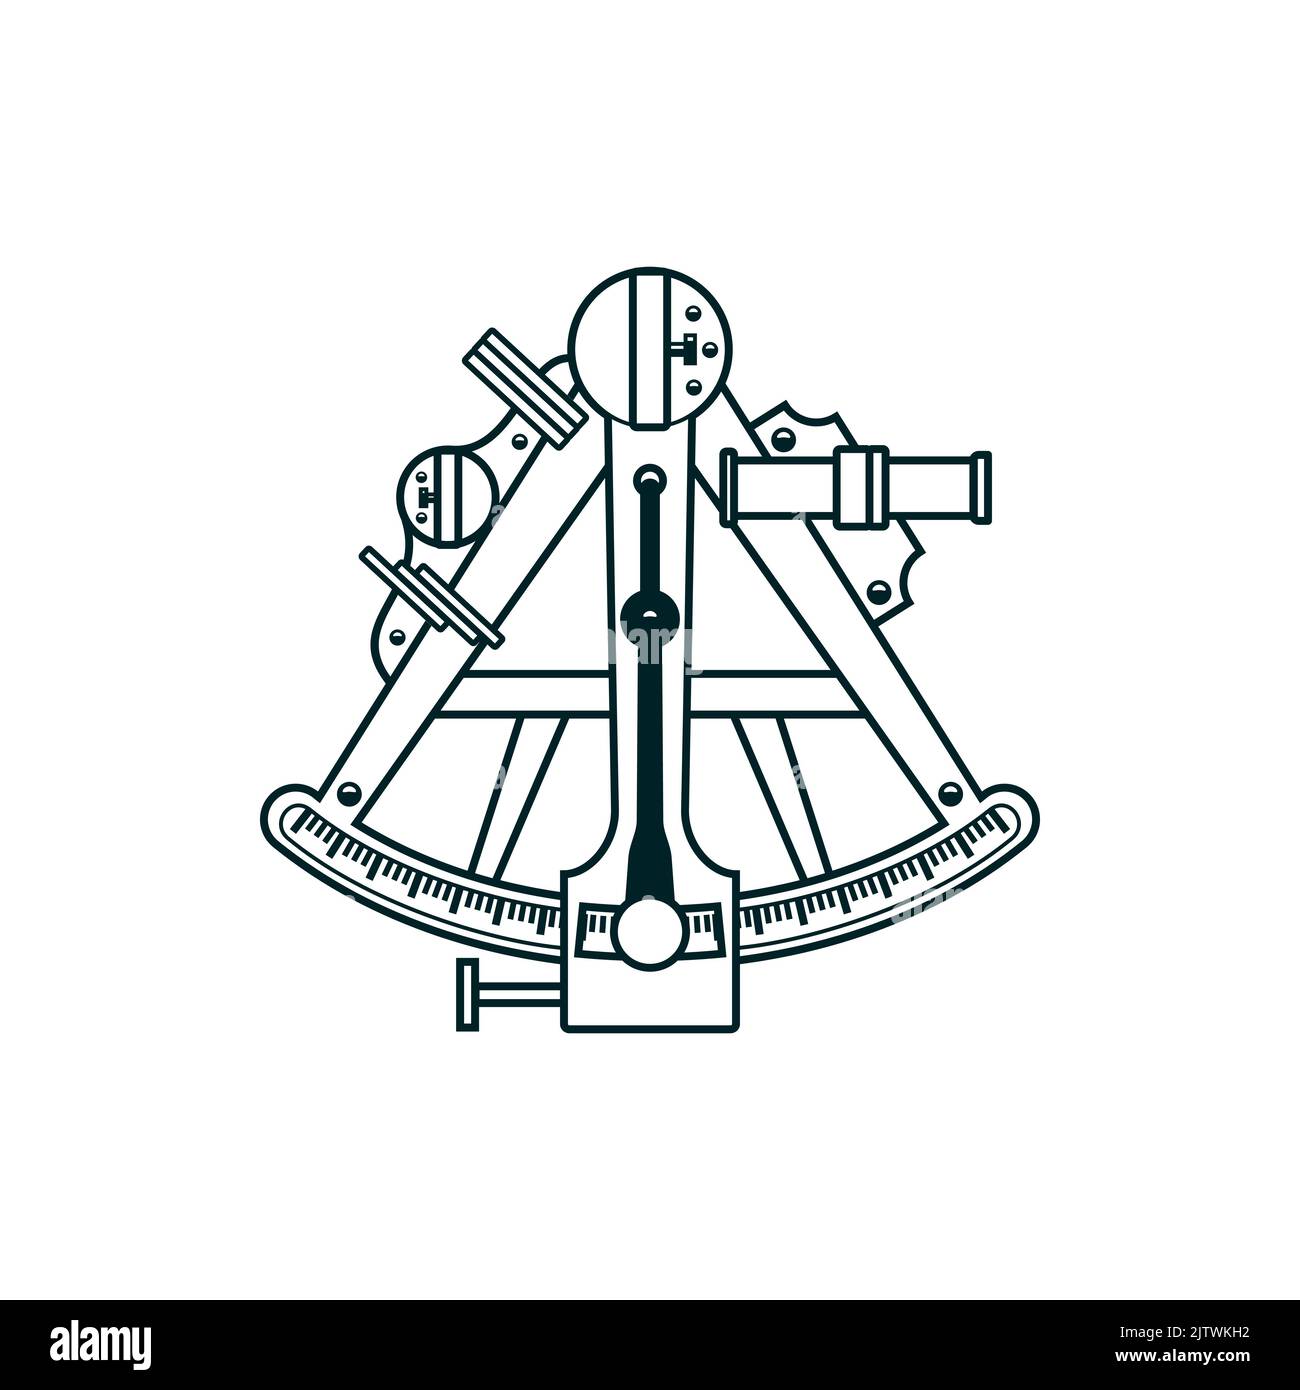 Sextant, ship navigation and nautical astrolabe, marine tool vector icon. Navy sailor sextant, astronomy and travel symbol of seafarer captain sailing equipment, sea and ocean compass Stock Vector